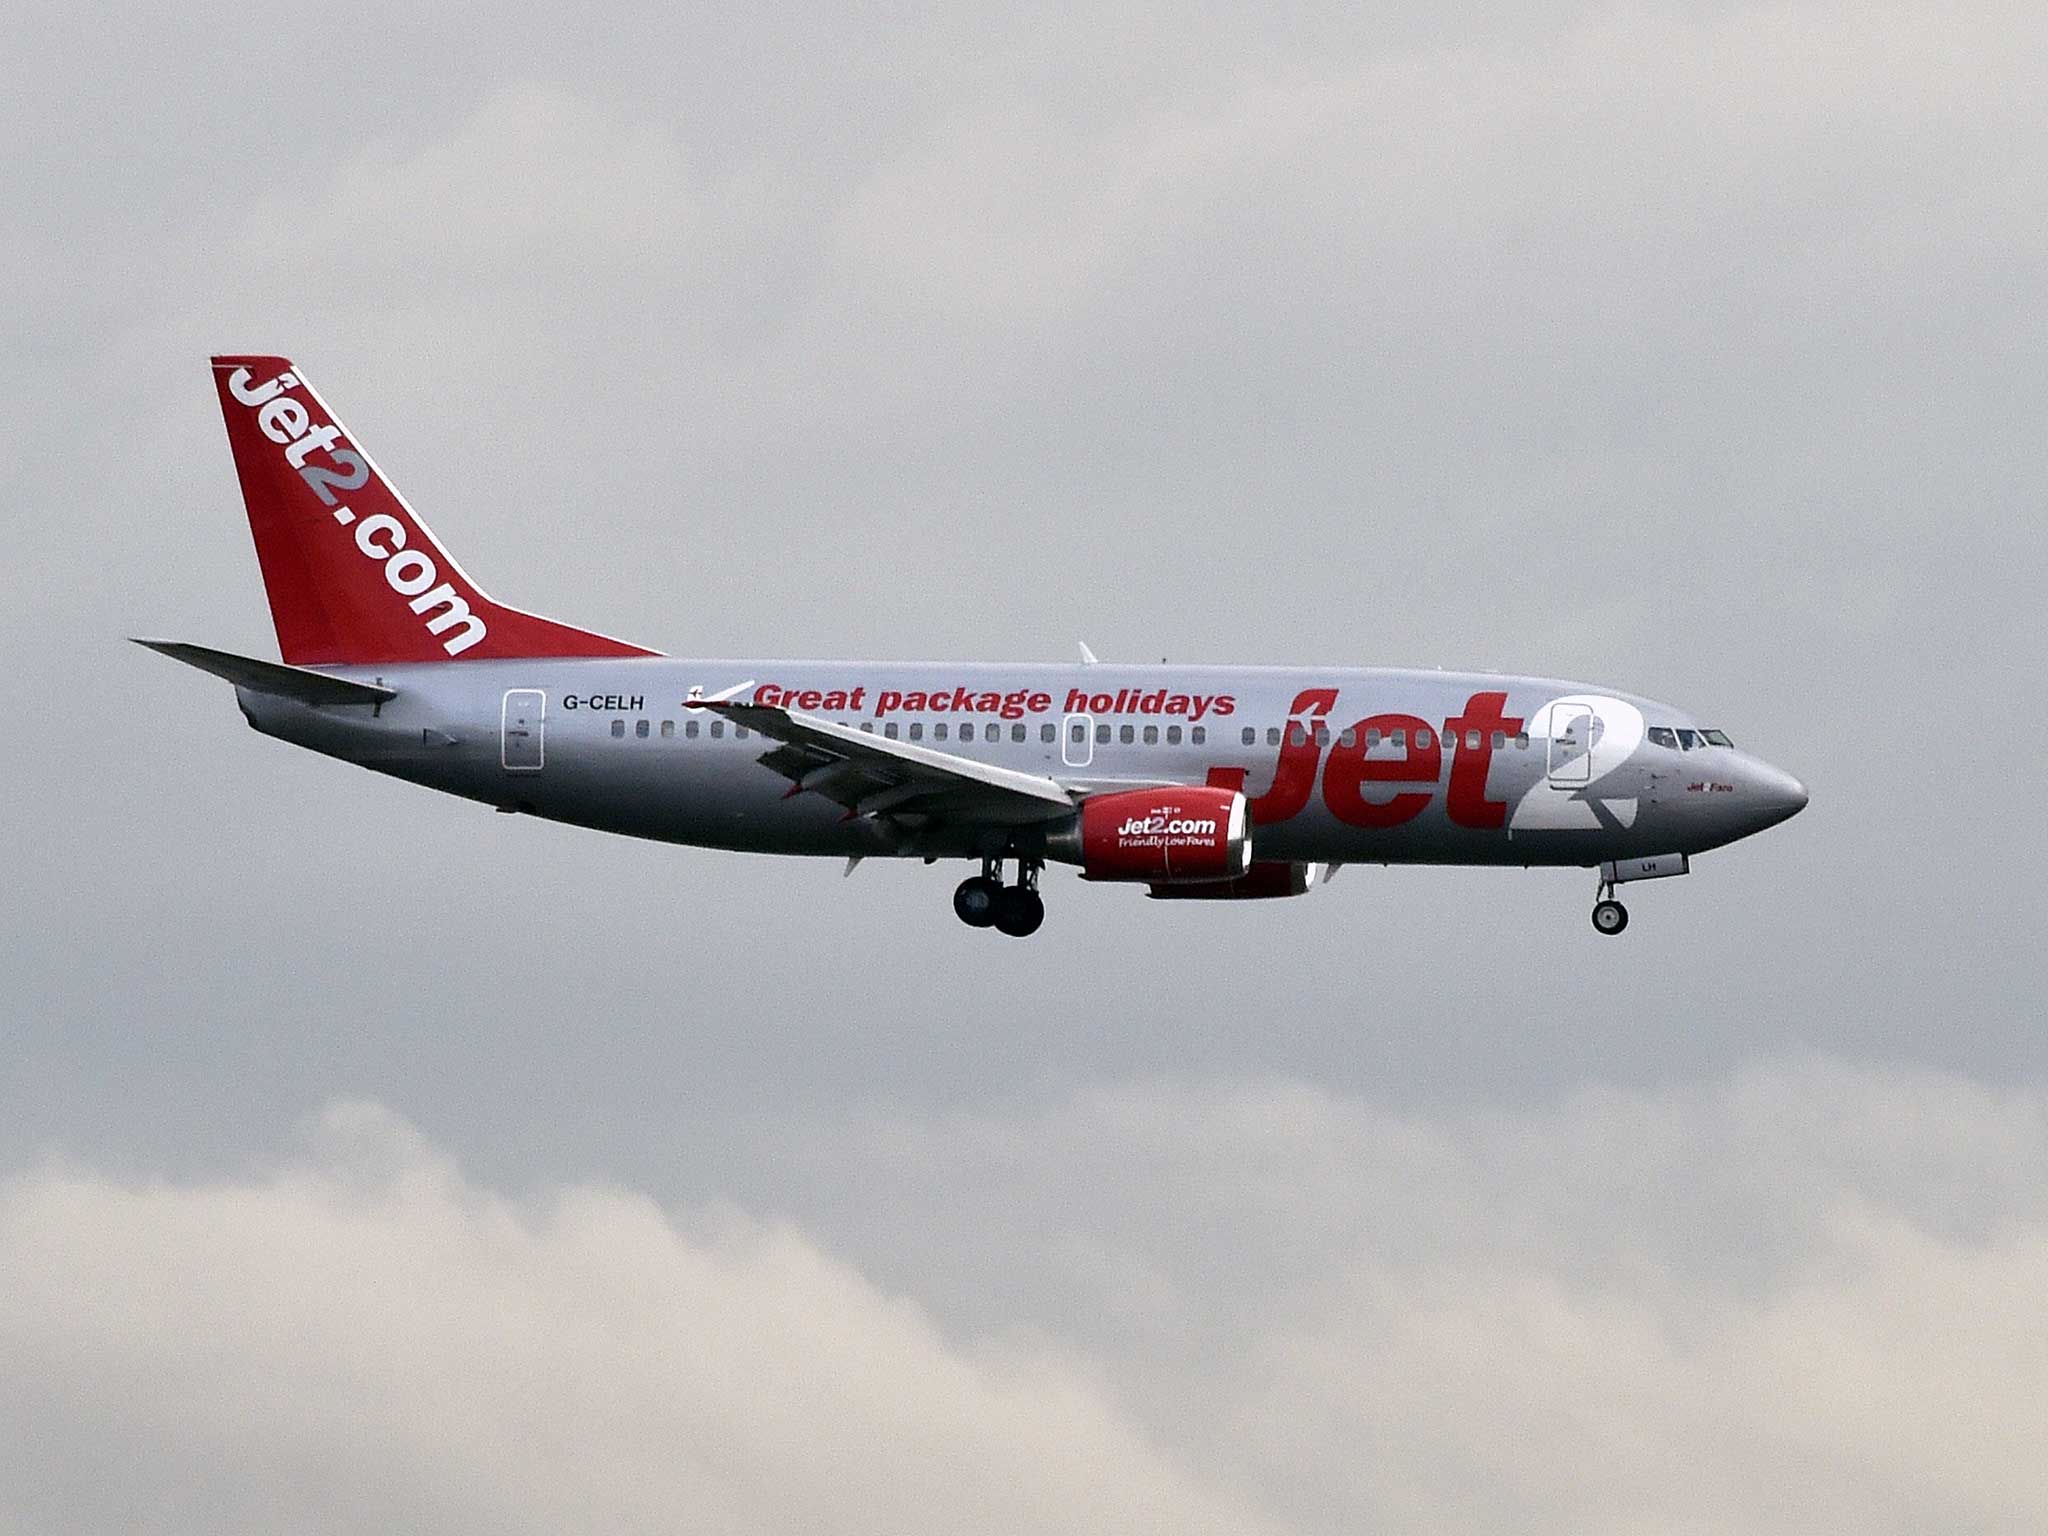 Yorkshire-based airliner Jet2 are among the companies been criticised for failing to give passengers information about their rights during disruption